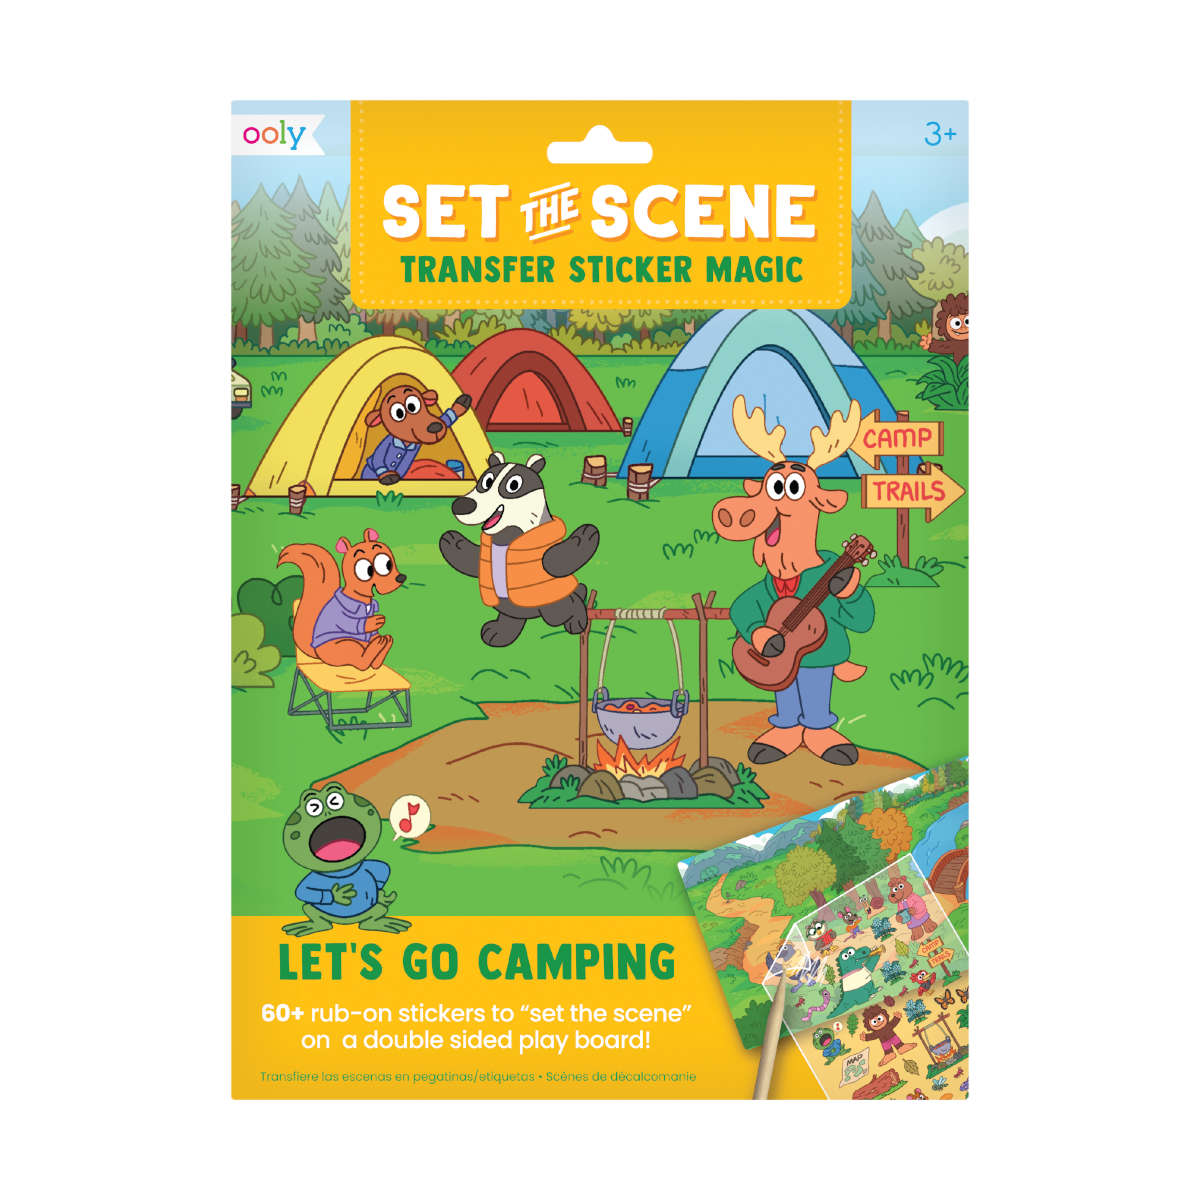 Ooly Set the Scene Transfer Sticker Magic - Let's Go Camping!